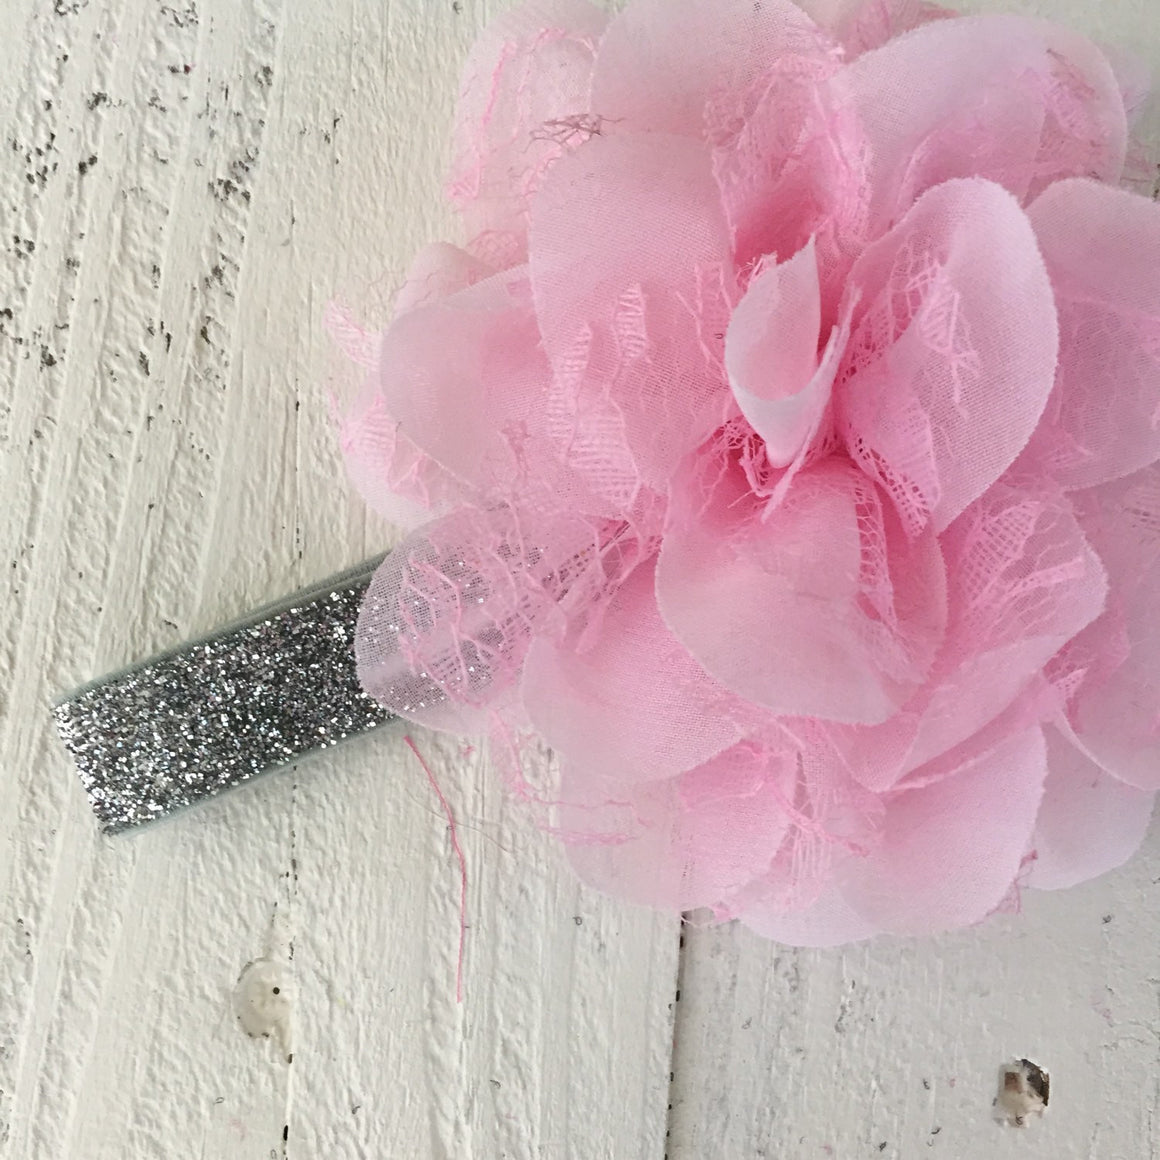 Pink Lace and Chiffon Layered Flower on Gold, Silver or White Glitter headband - HoneyLoveBoutique